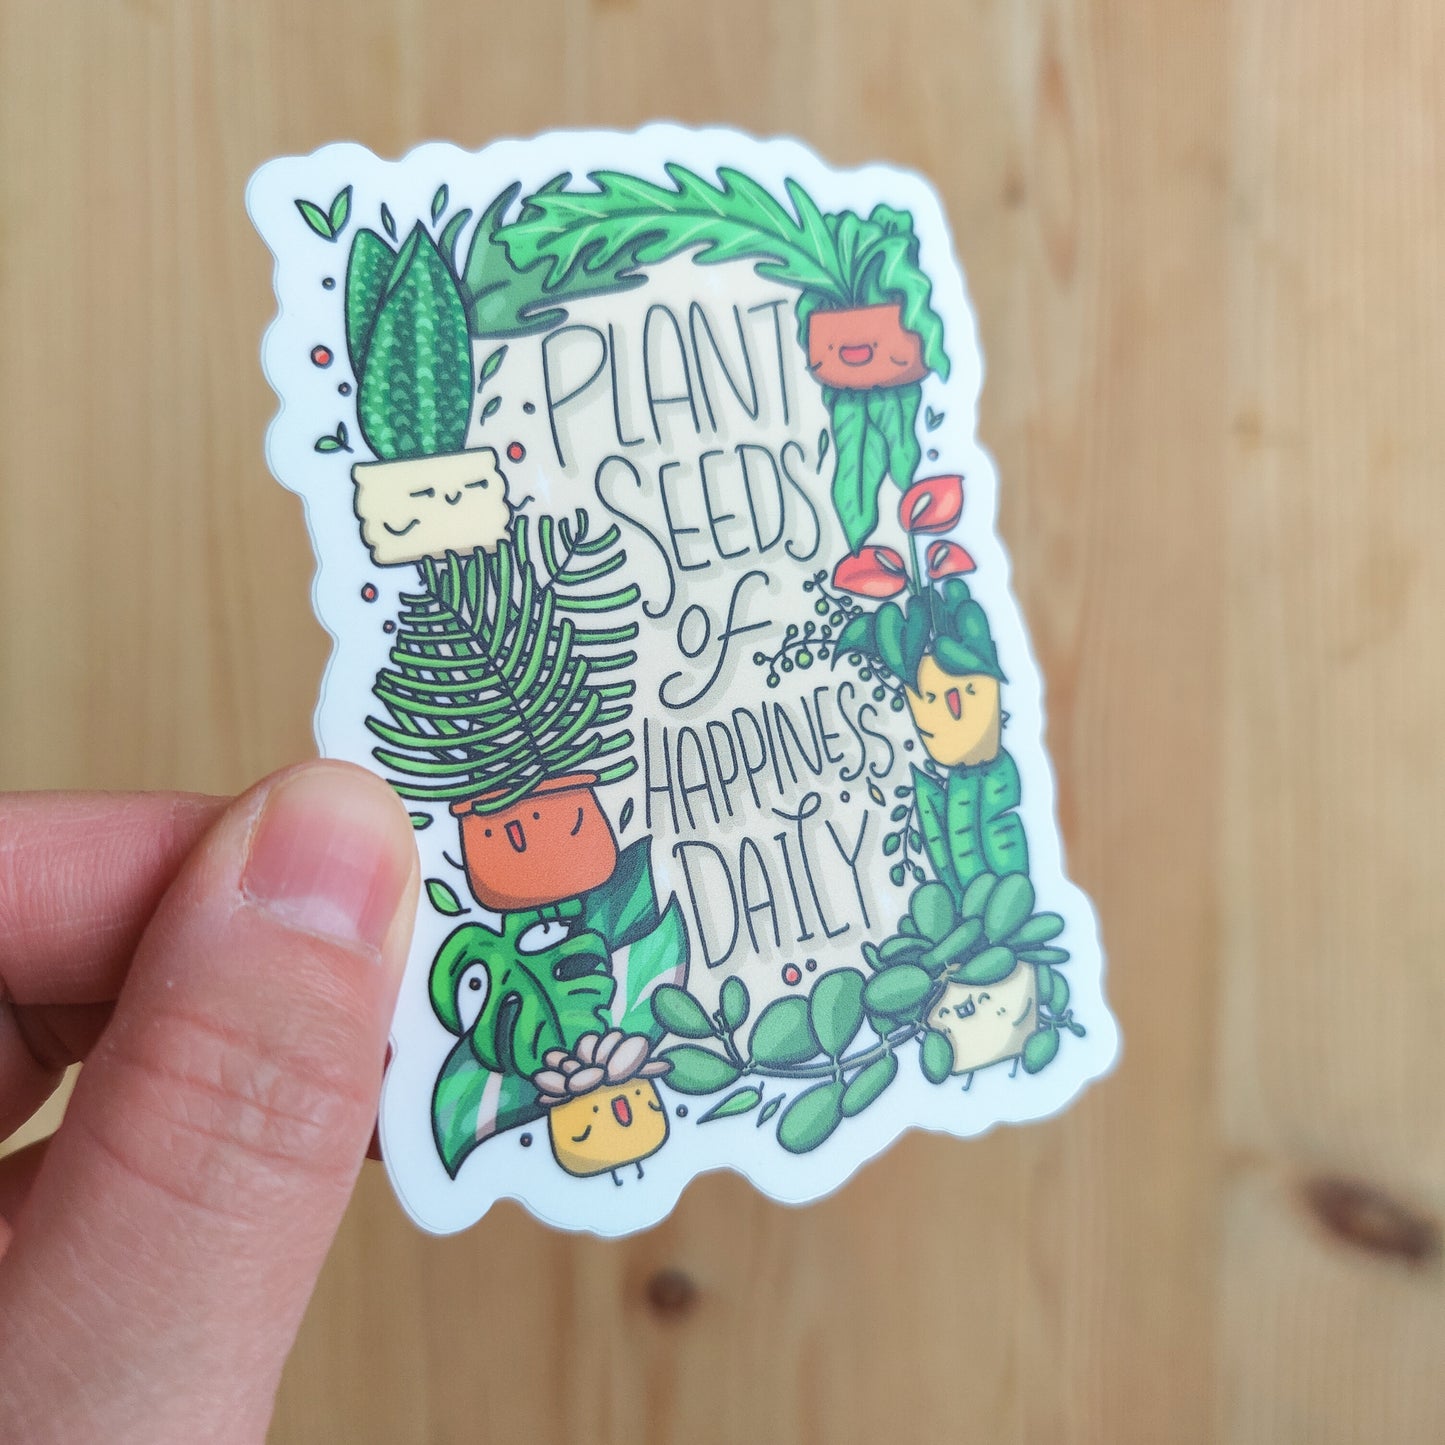 Plant seeds of Happiness Daily Vinyl Sticker